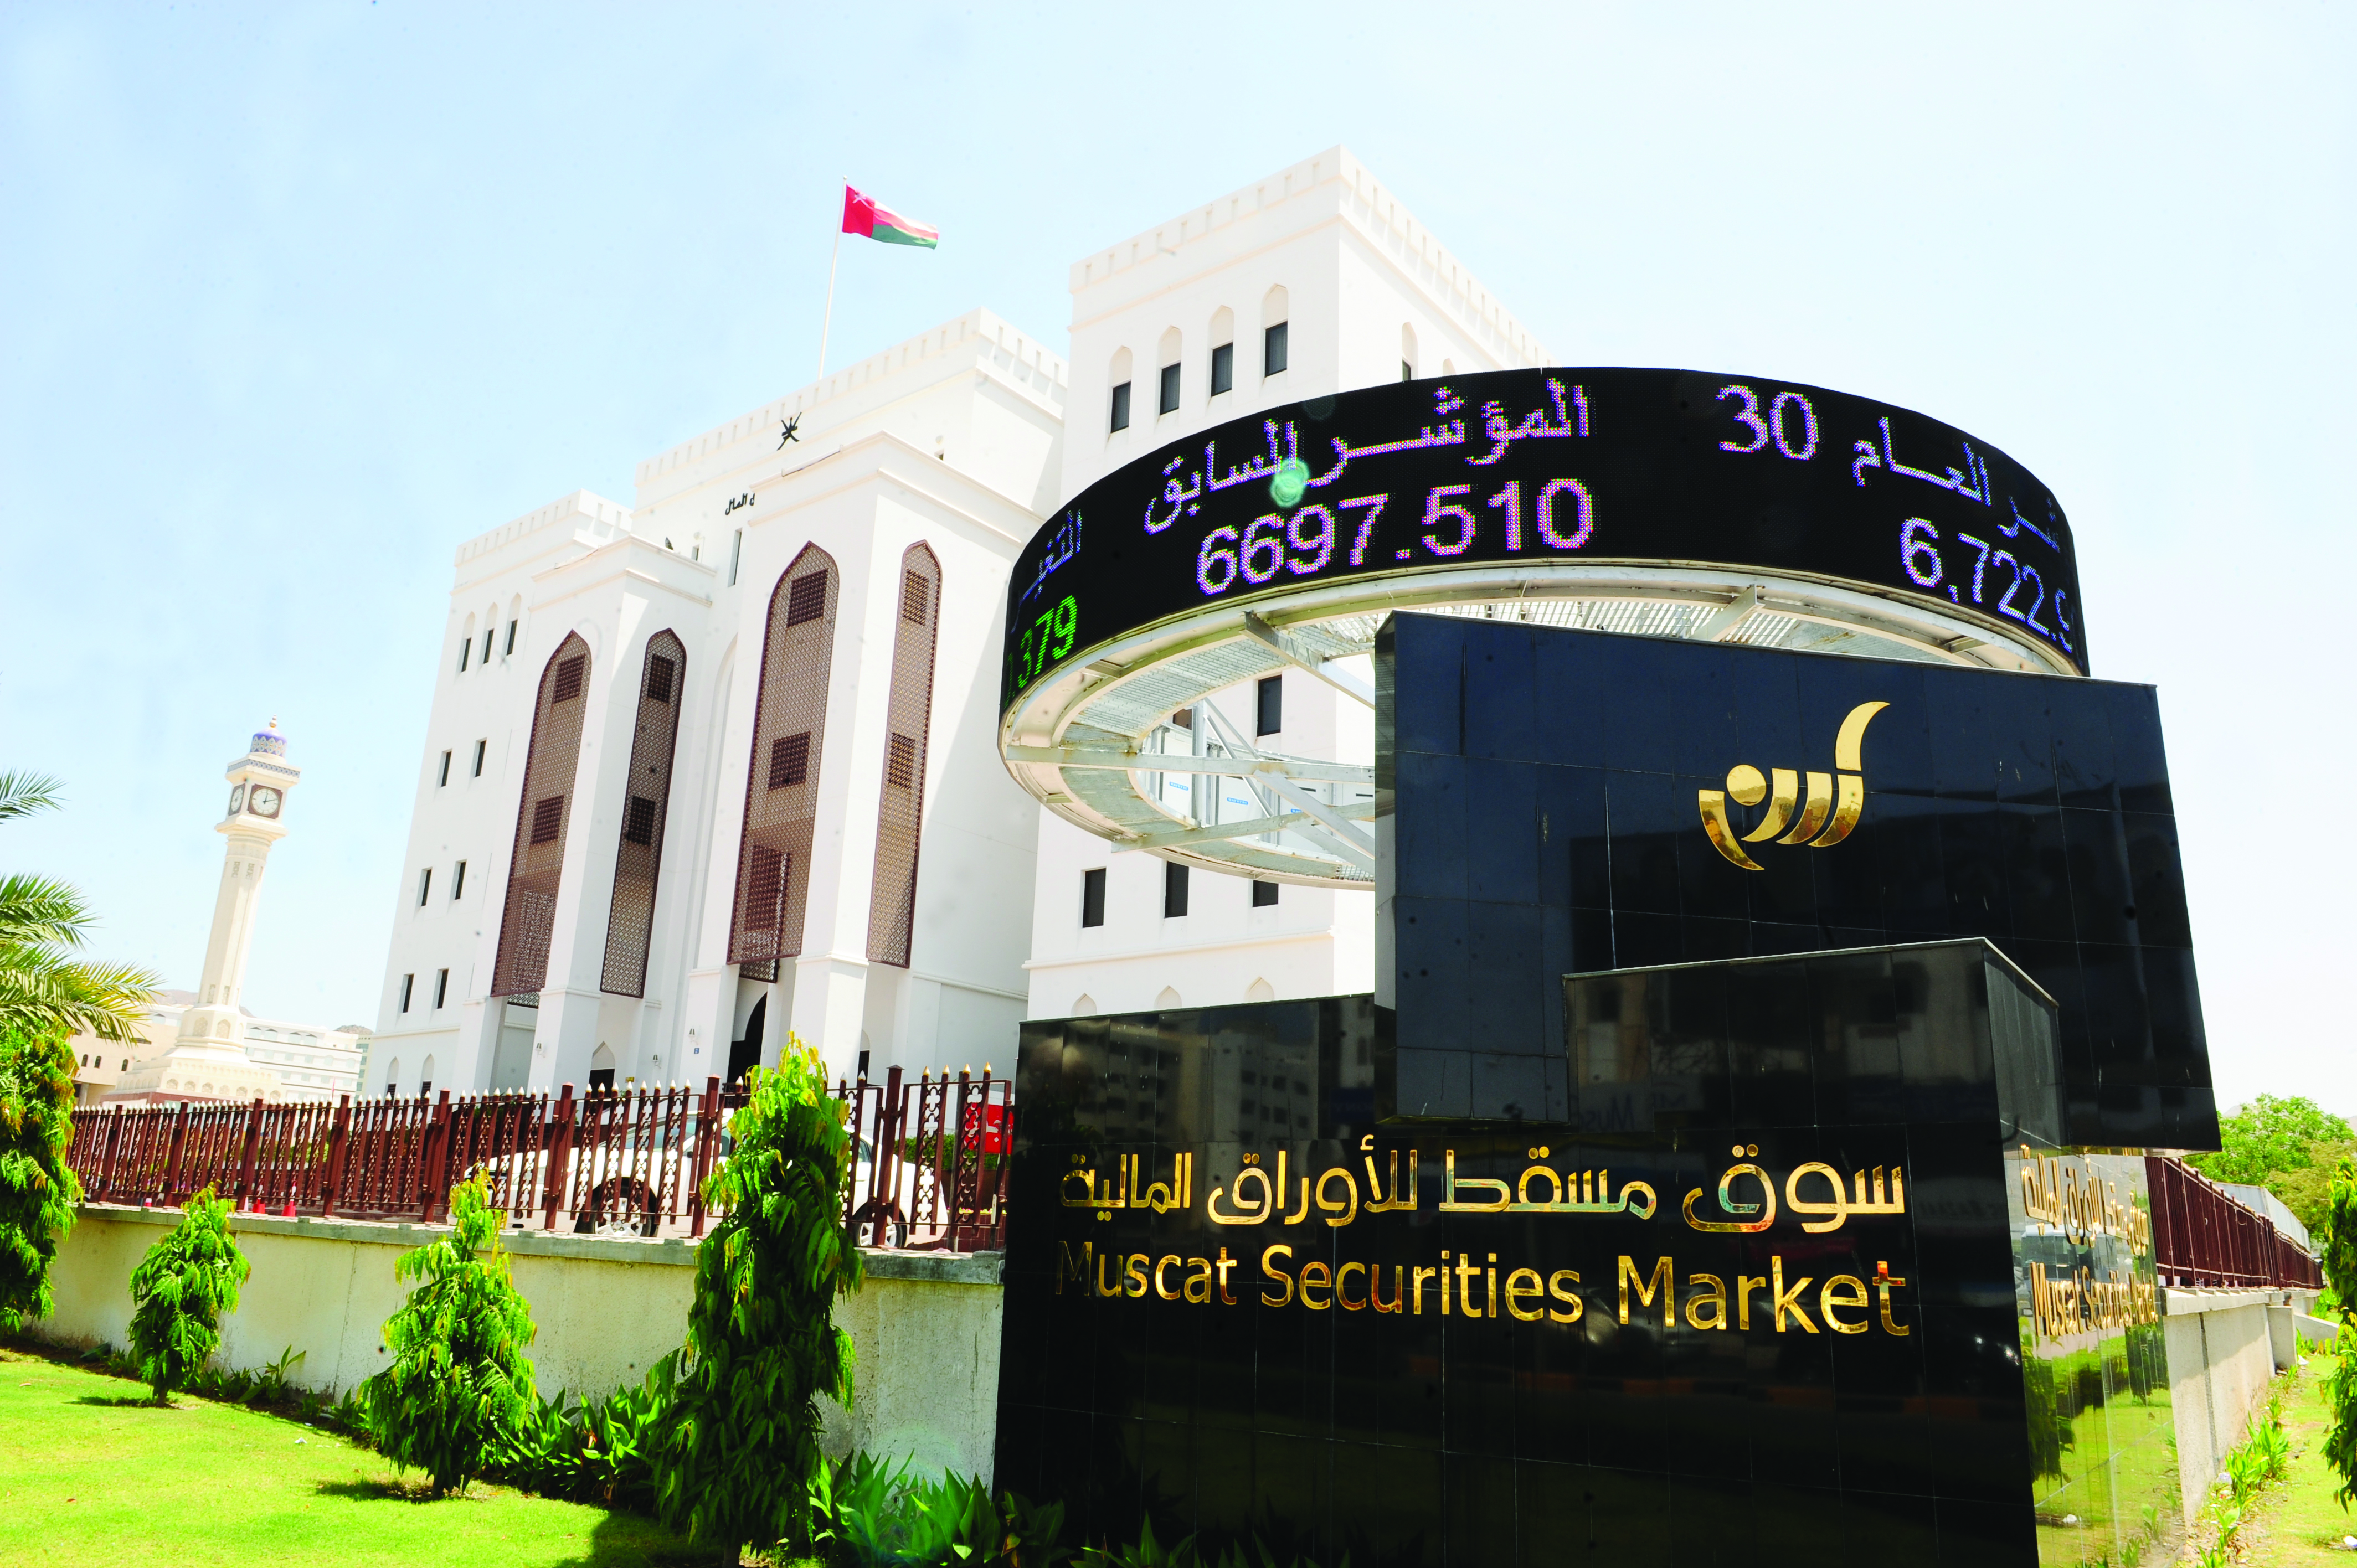 Muscat bourse achieves 25 per cent growth in turnover